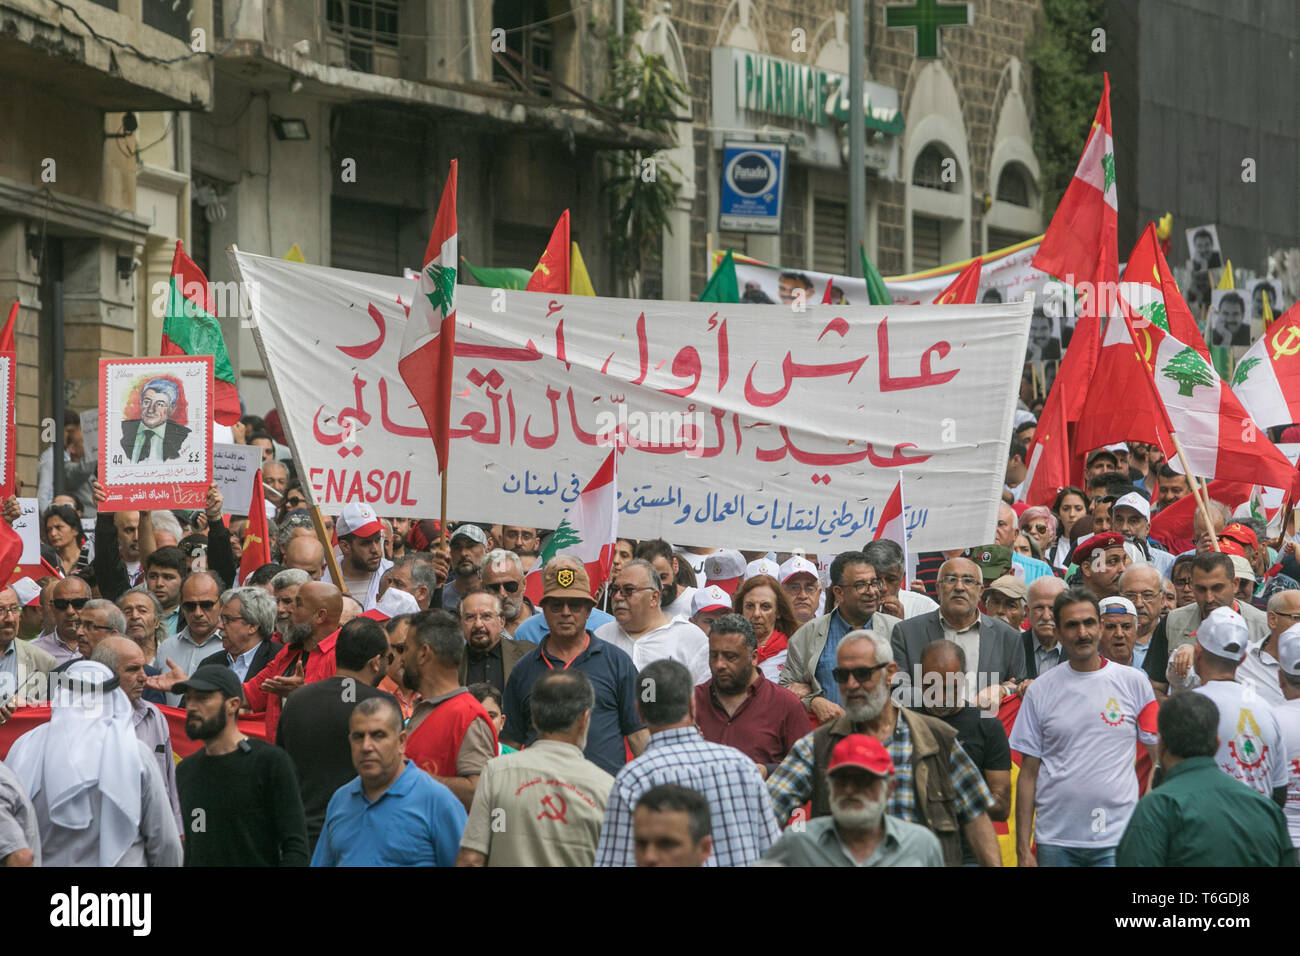 Beirut, Lebanon. 1st May, 2019. Supporters of the Lebanese Communist party march with Arabic banners in a May Day rally through central Beirut as they mark International Workers' Day Credit: amer ghazzal/Alamy Live News Stock Photo